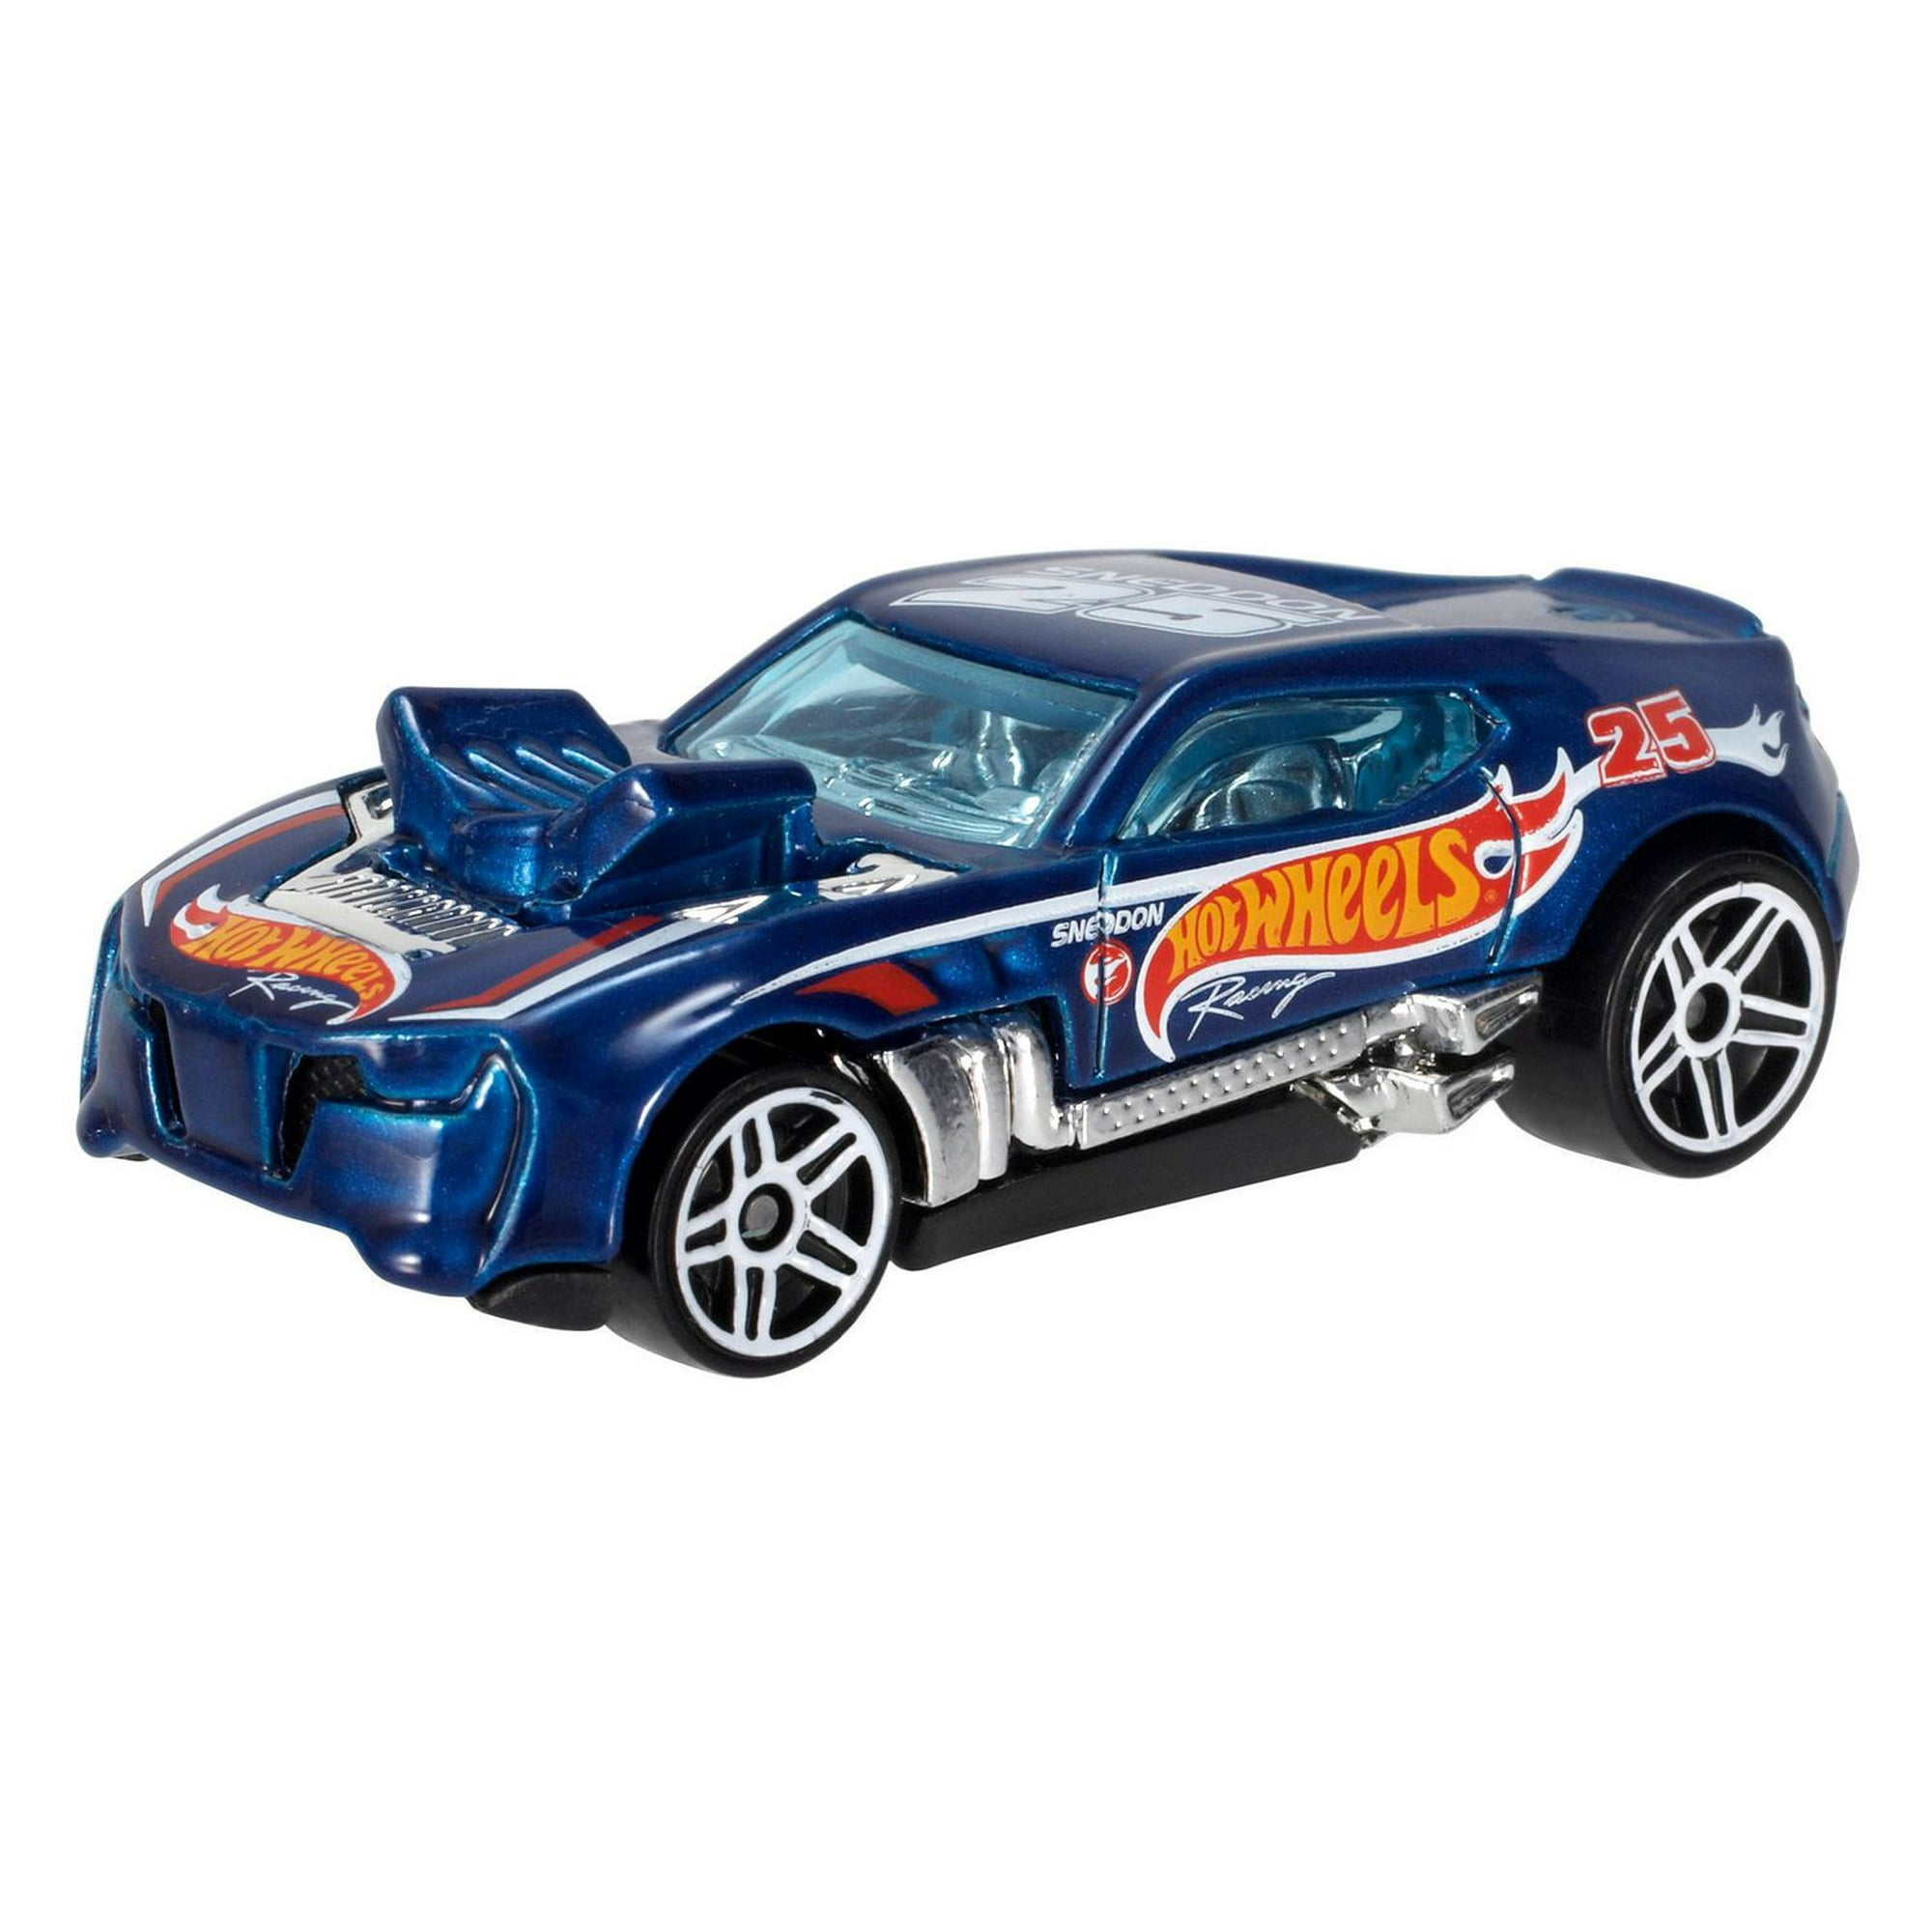 [LAST STOCK] Mattel Hot Wheels Original Tool Box Storage box Collection for  Cars with hot wheels logo (BLUE only)